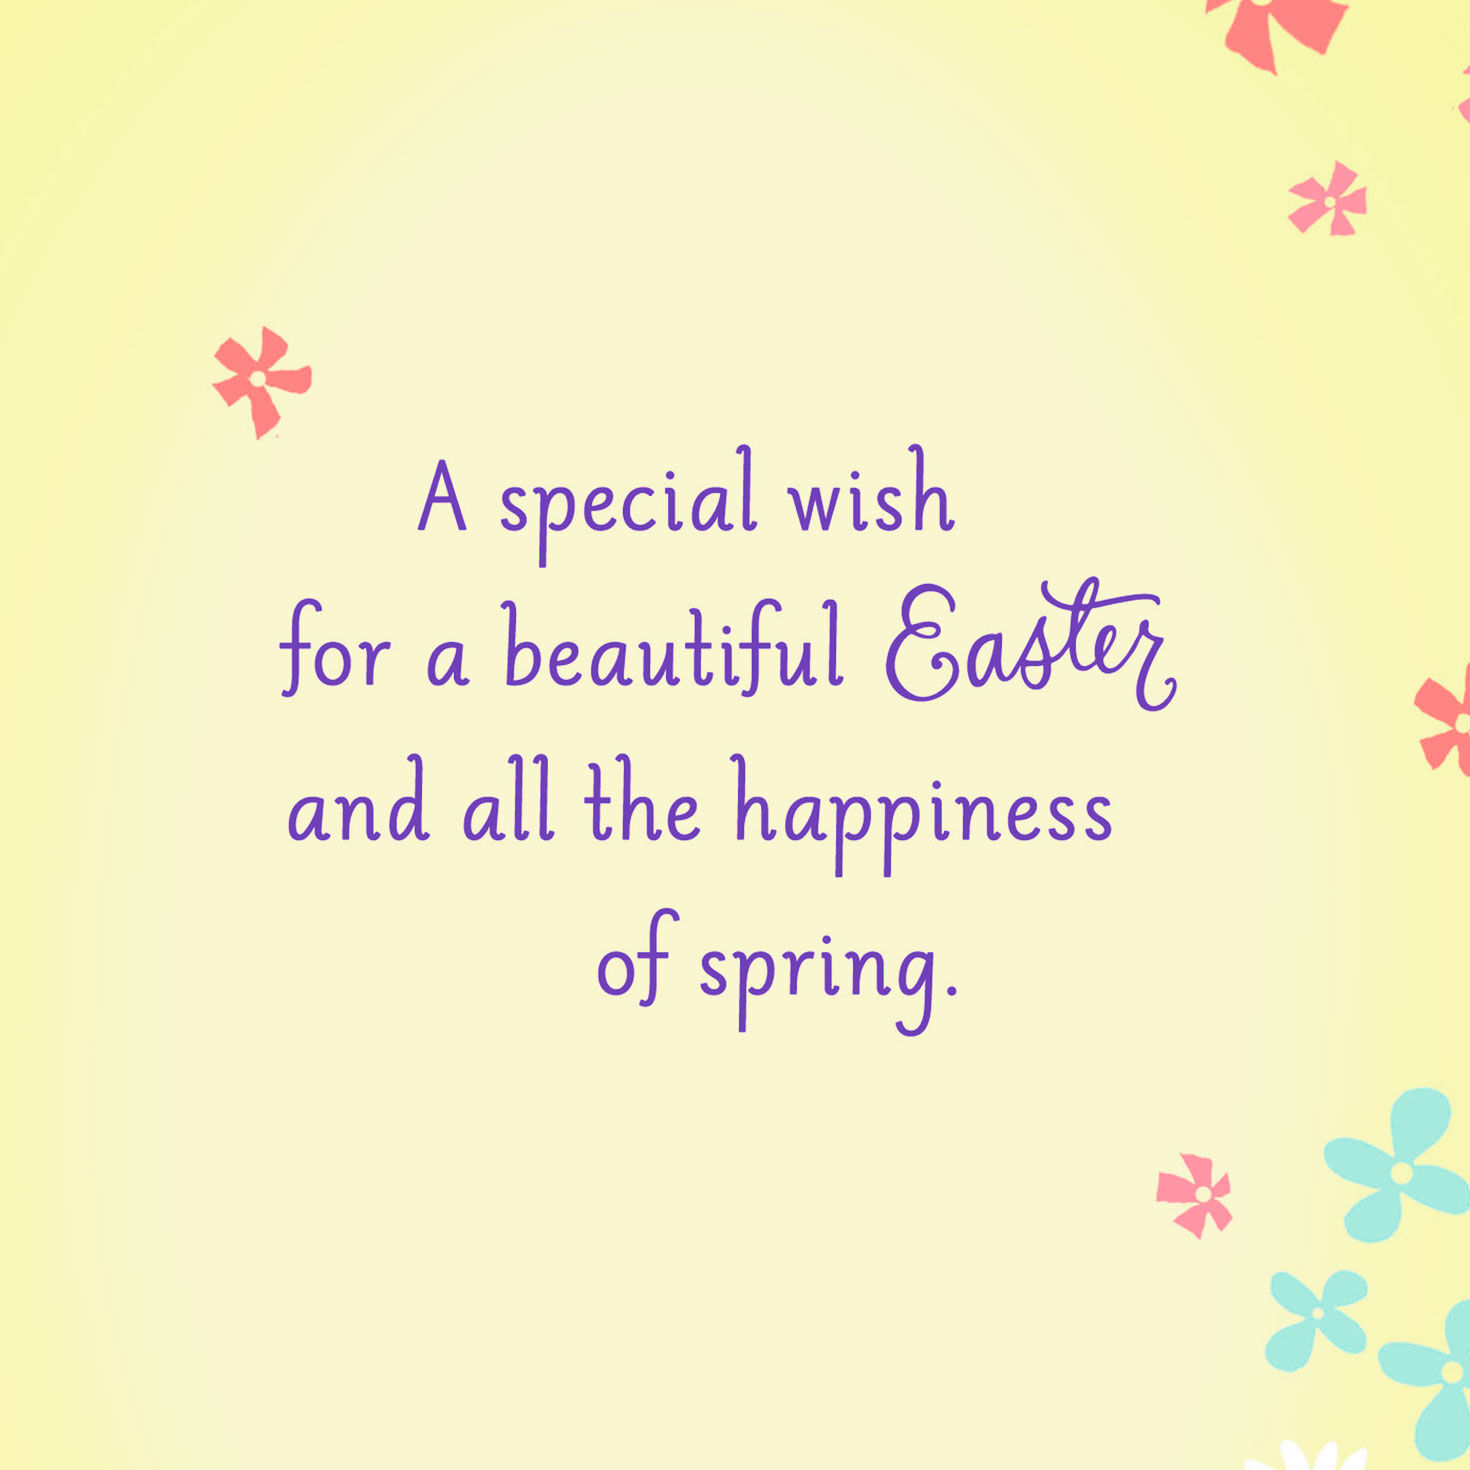 A Happy Spring and Beautiful Easter Card for only USD 2.00 | Hallmark